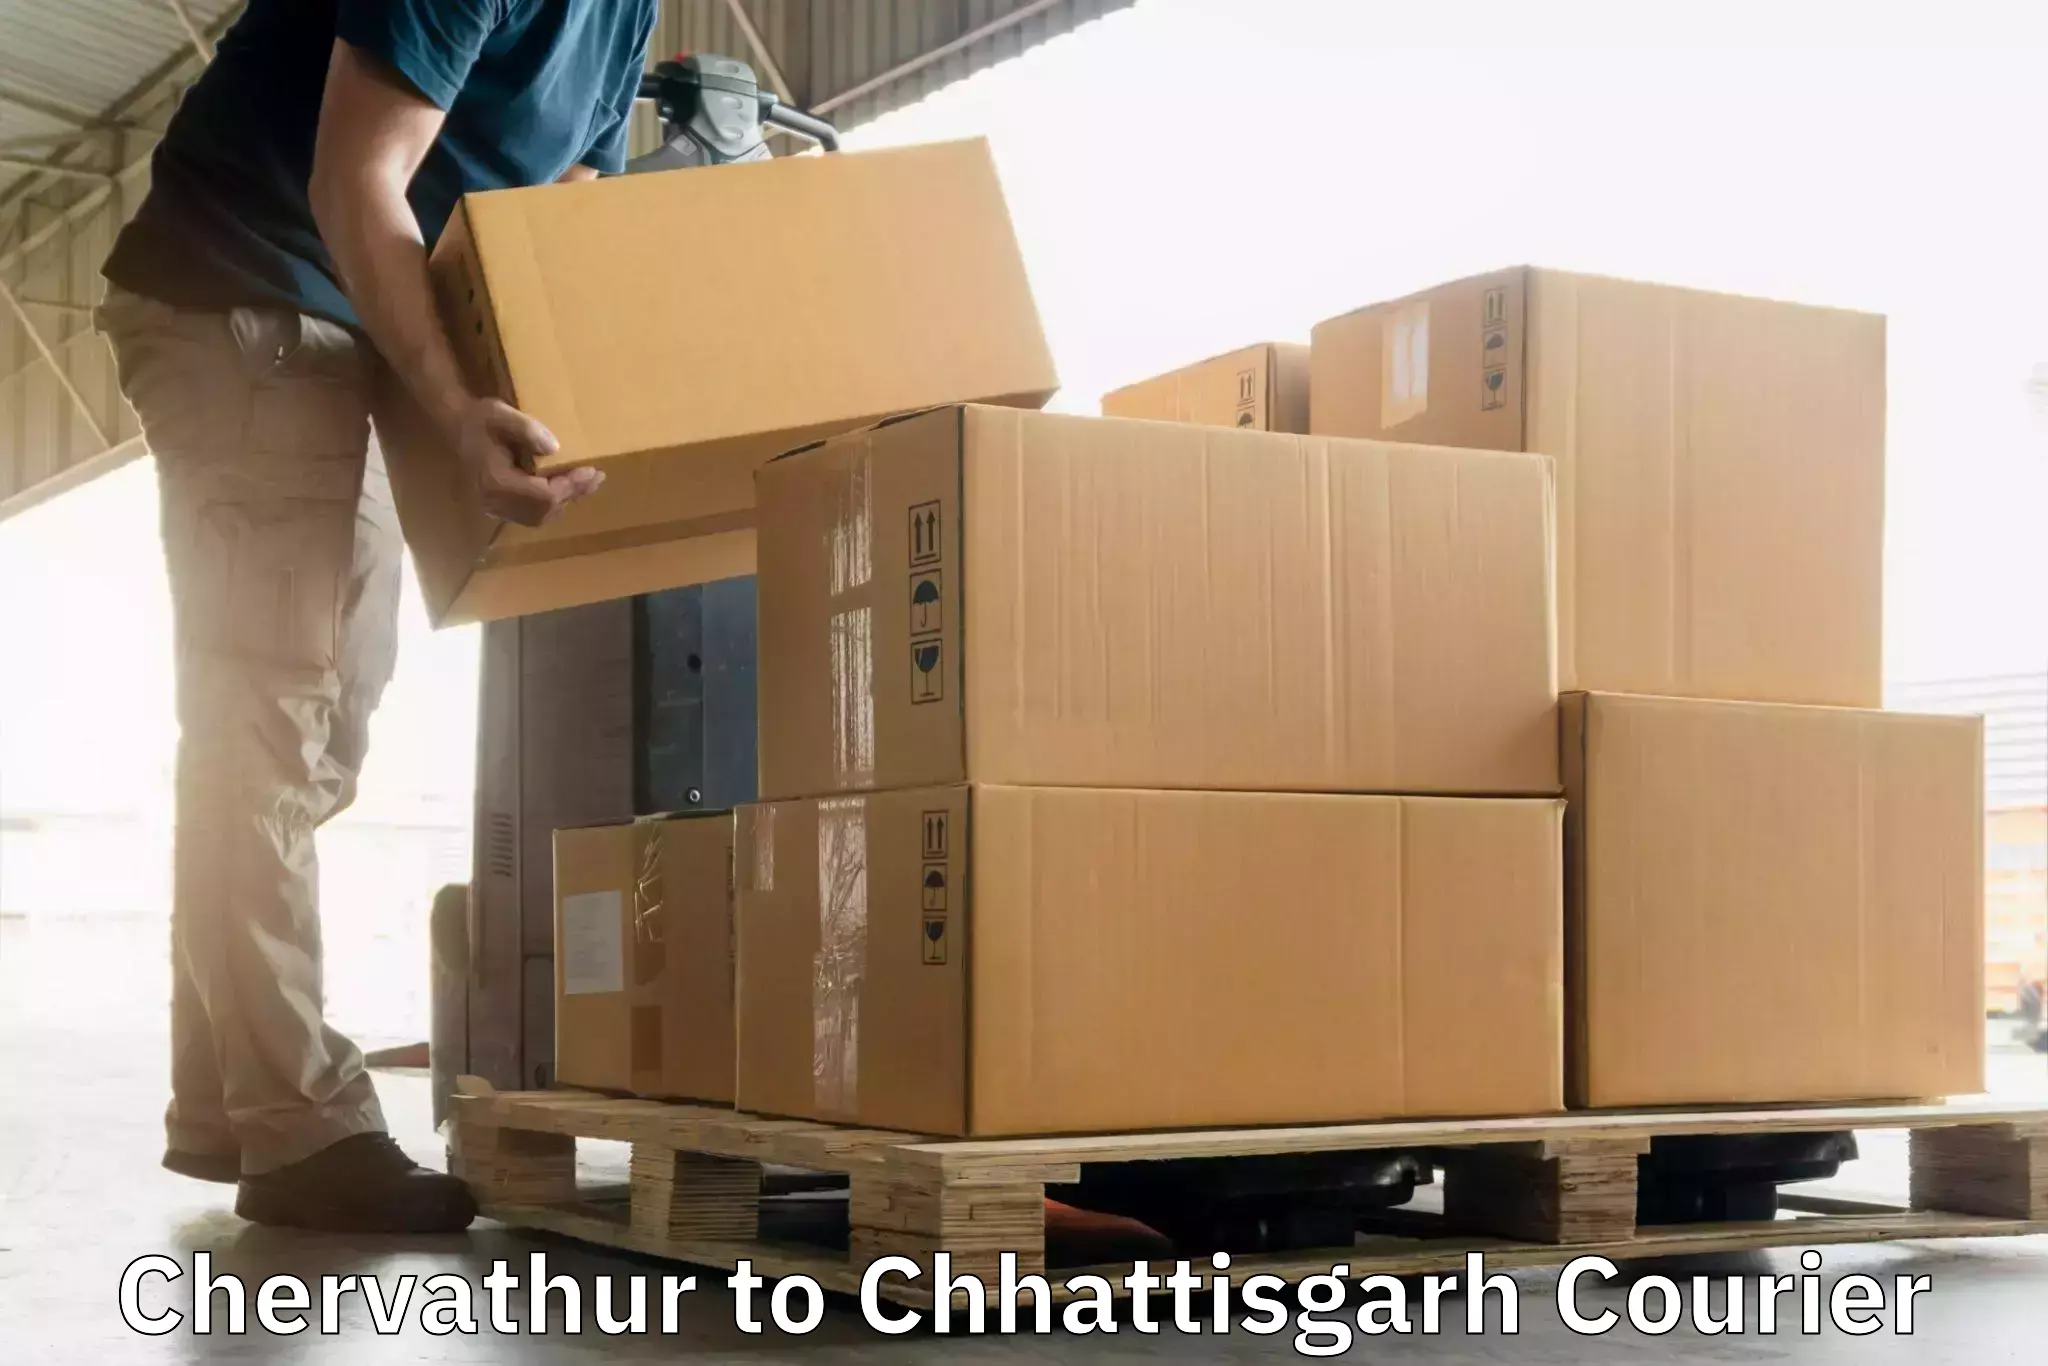 Tech-enabled shipping Chervathur to Bastar